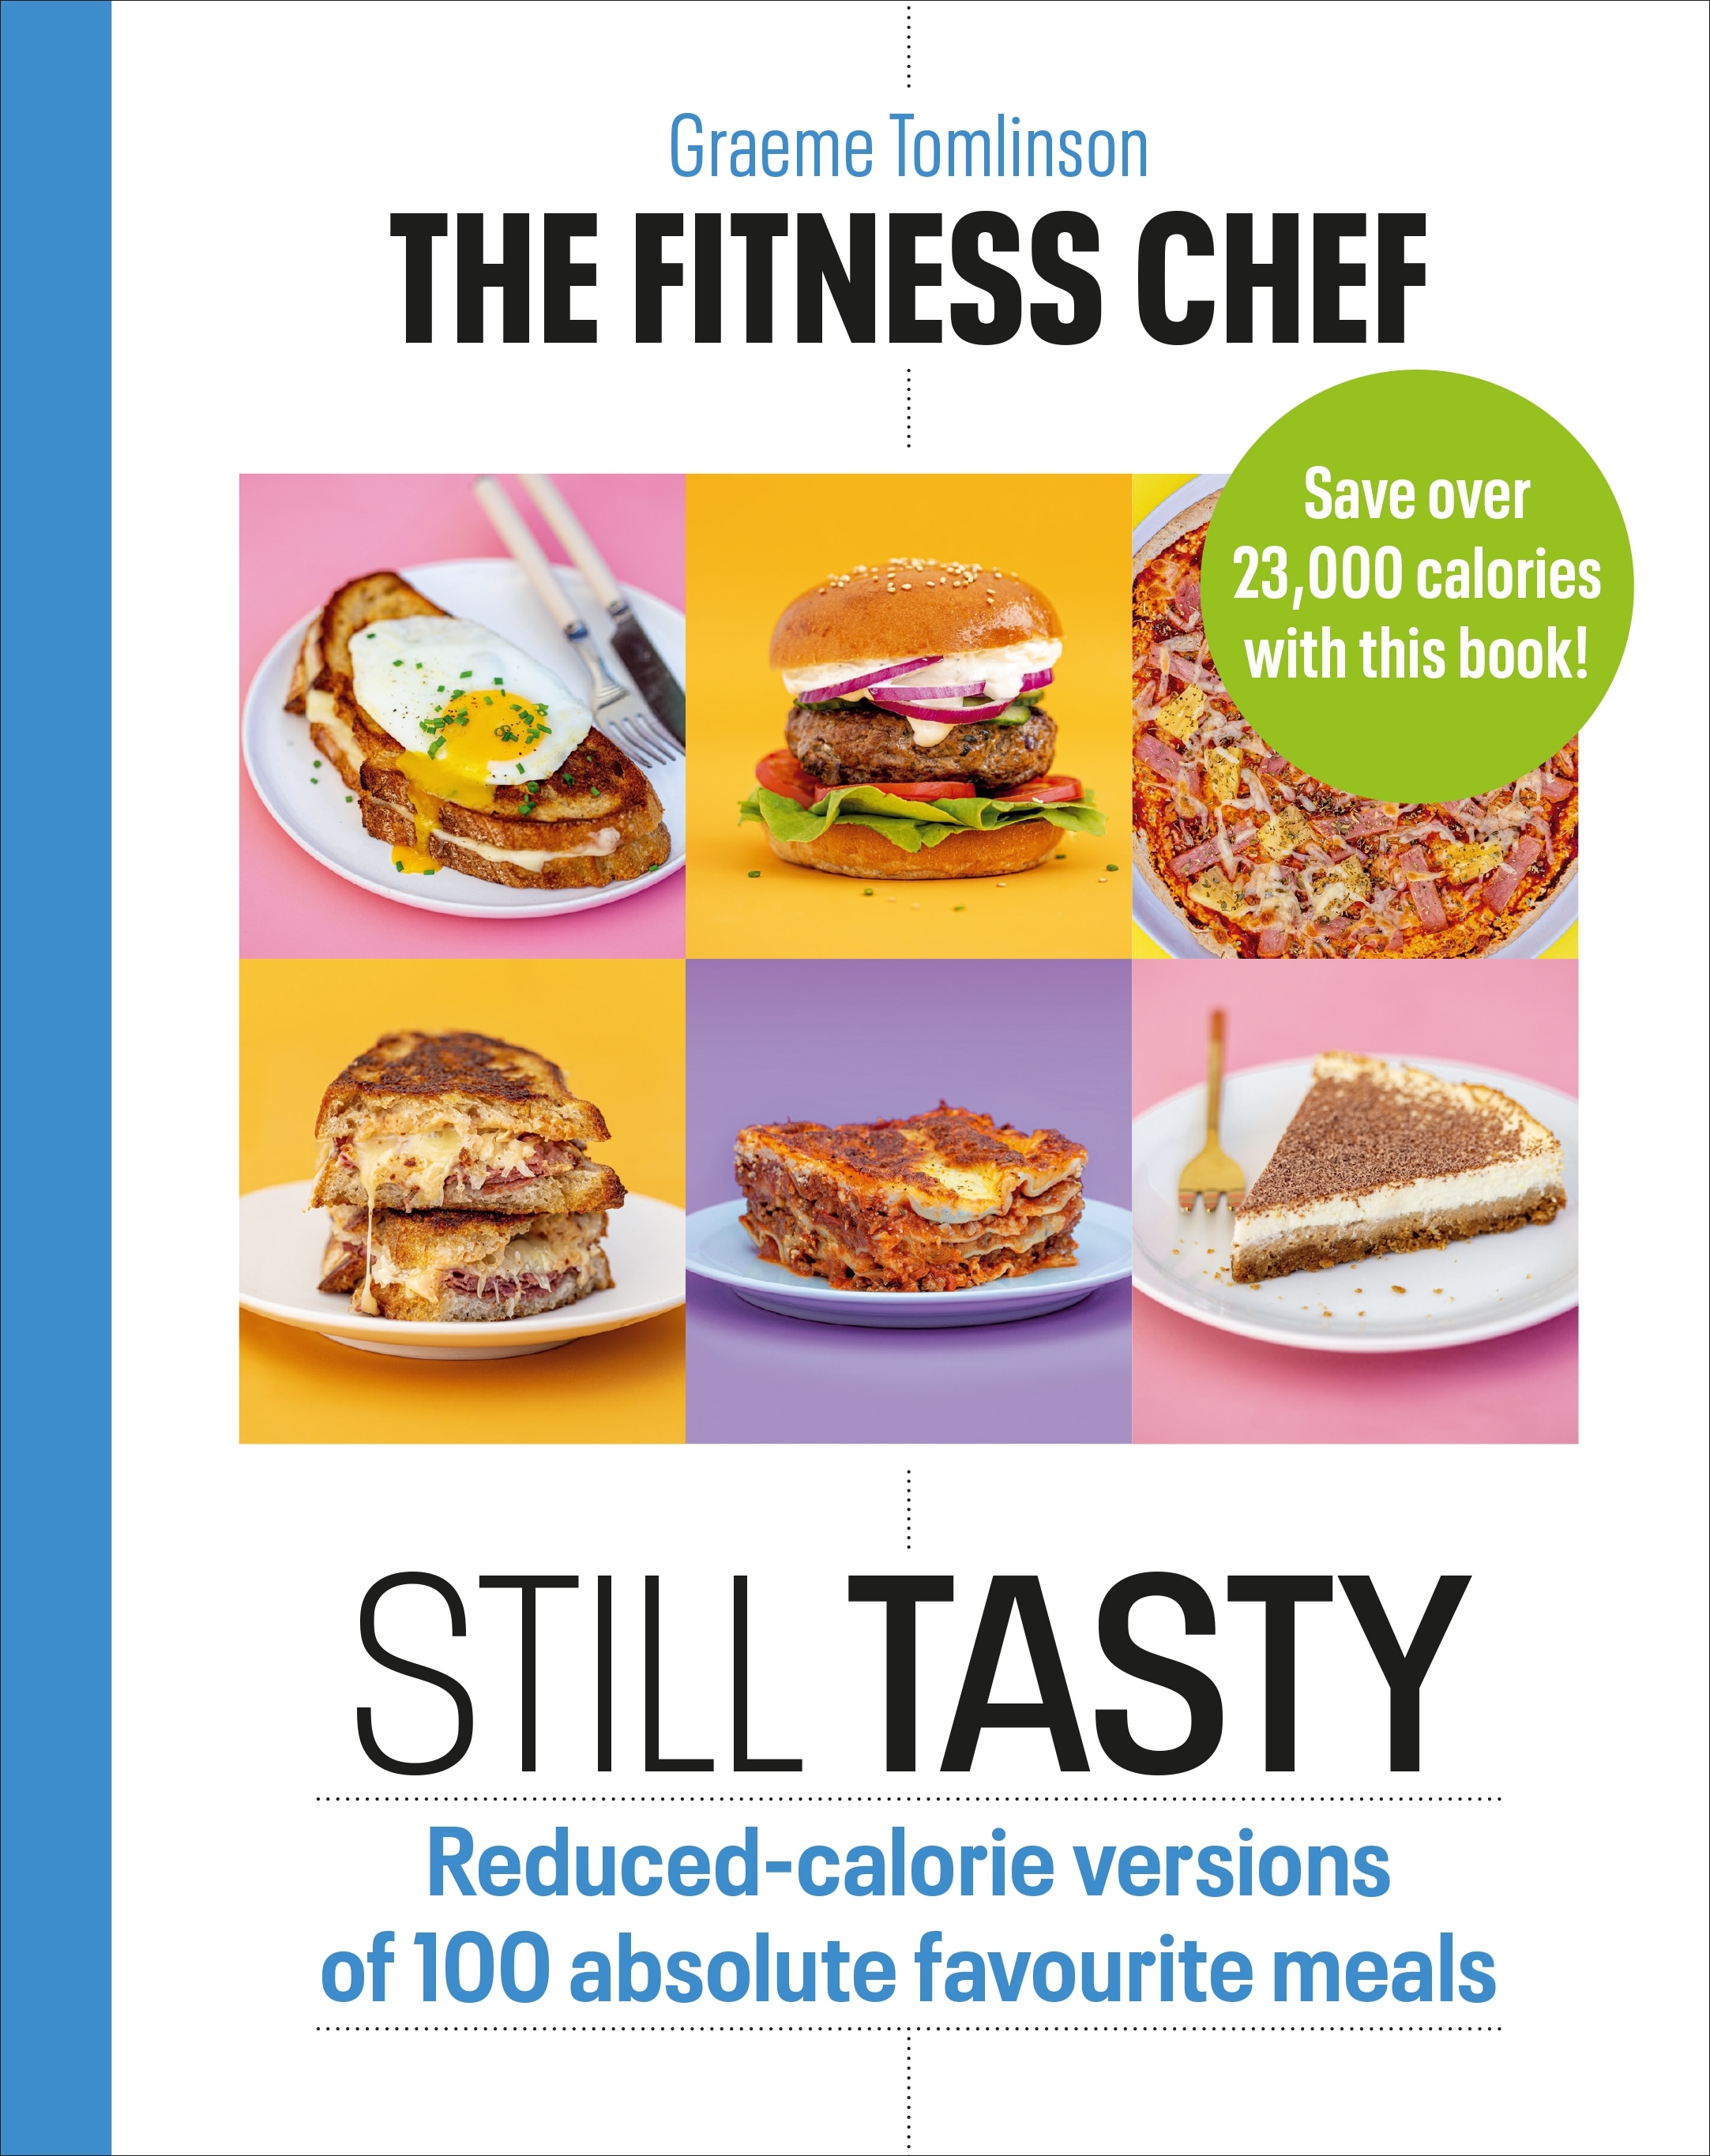 Book “The Fitness Chef: Still Tasty” by Graeme Tomlinson — January 7, 2021